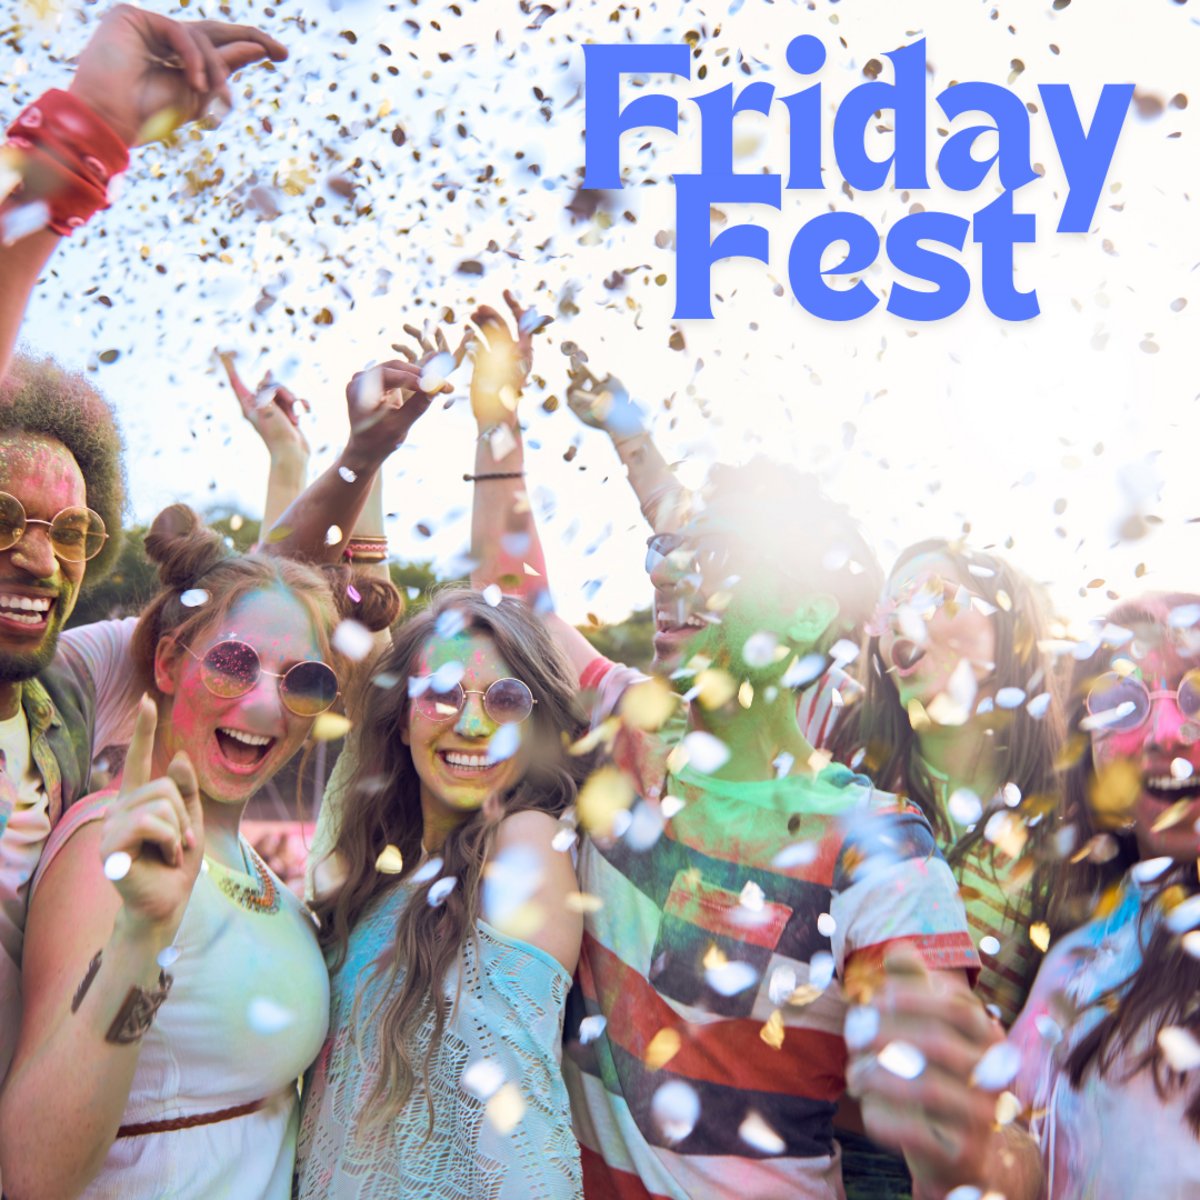 We're excited that #FridayFest is back this year with an awesome lineup of bands! Get ready to dance to some great music at this #summertimeconcertseries. The events run from 5-9 pm on the lawn of the Van Wezel Performing Arts Hall. See who's playing here: bit.ly/44O5B2u